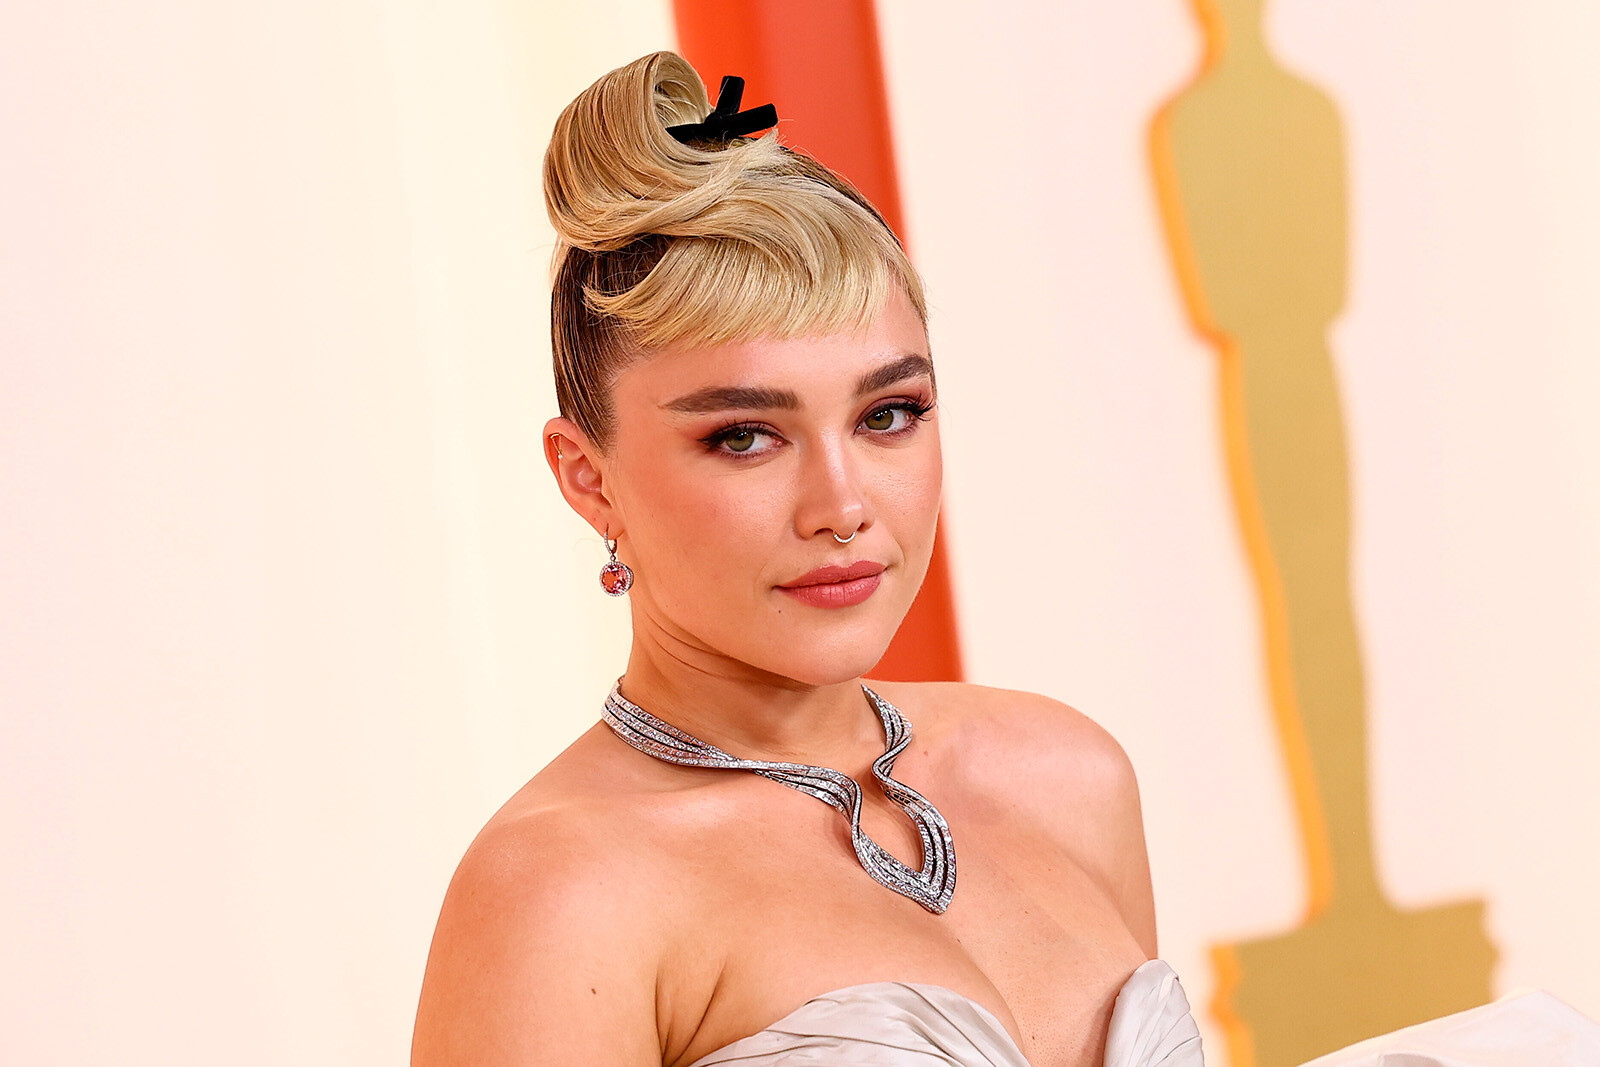 Florence-Pugh-accepting-he-body-02-Mainstyle.jpg